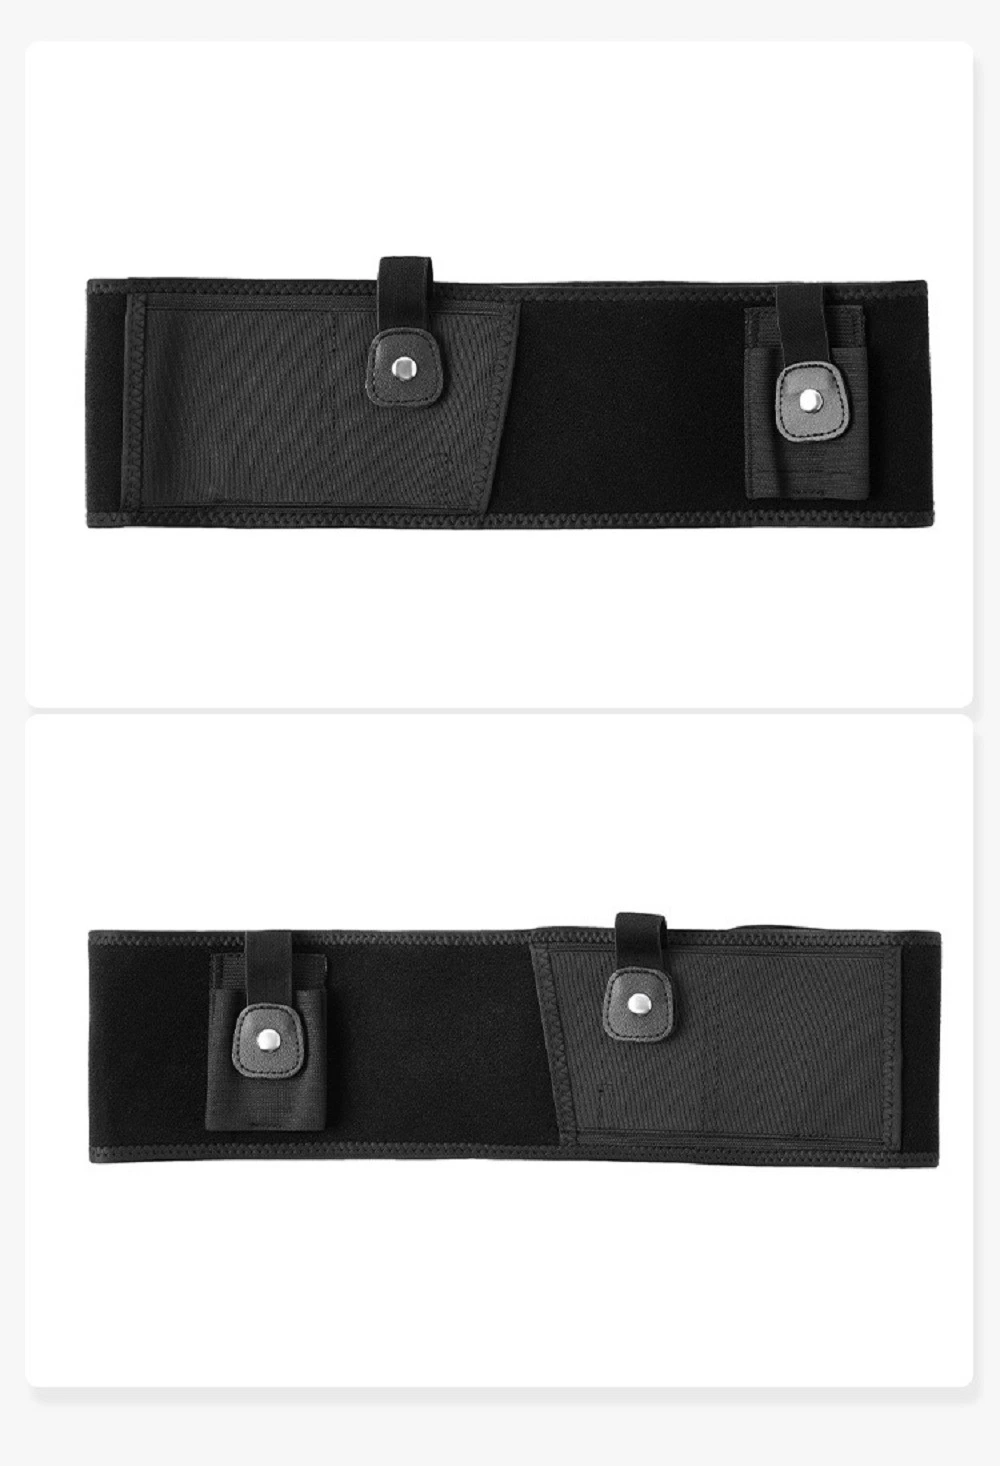 Concealed Belly Band Gun Holster Carry Pouch for Men and Women Ci17708